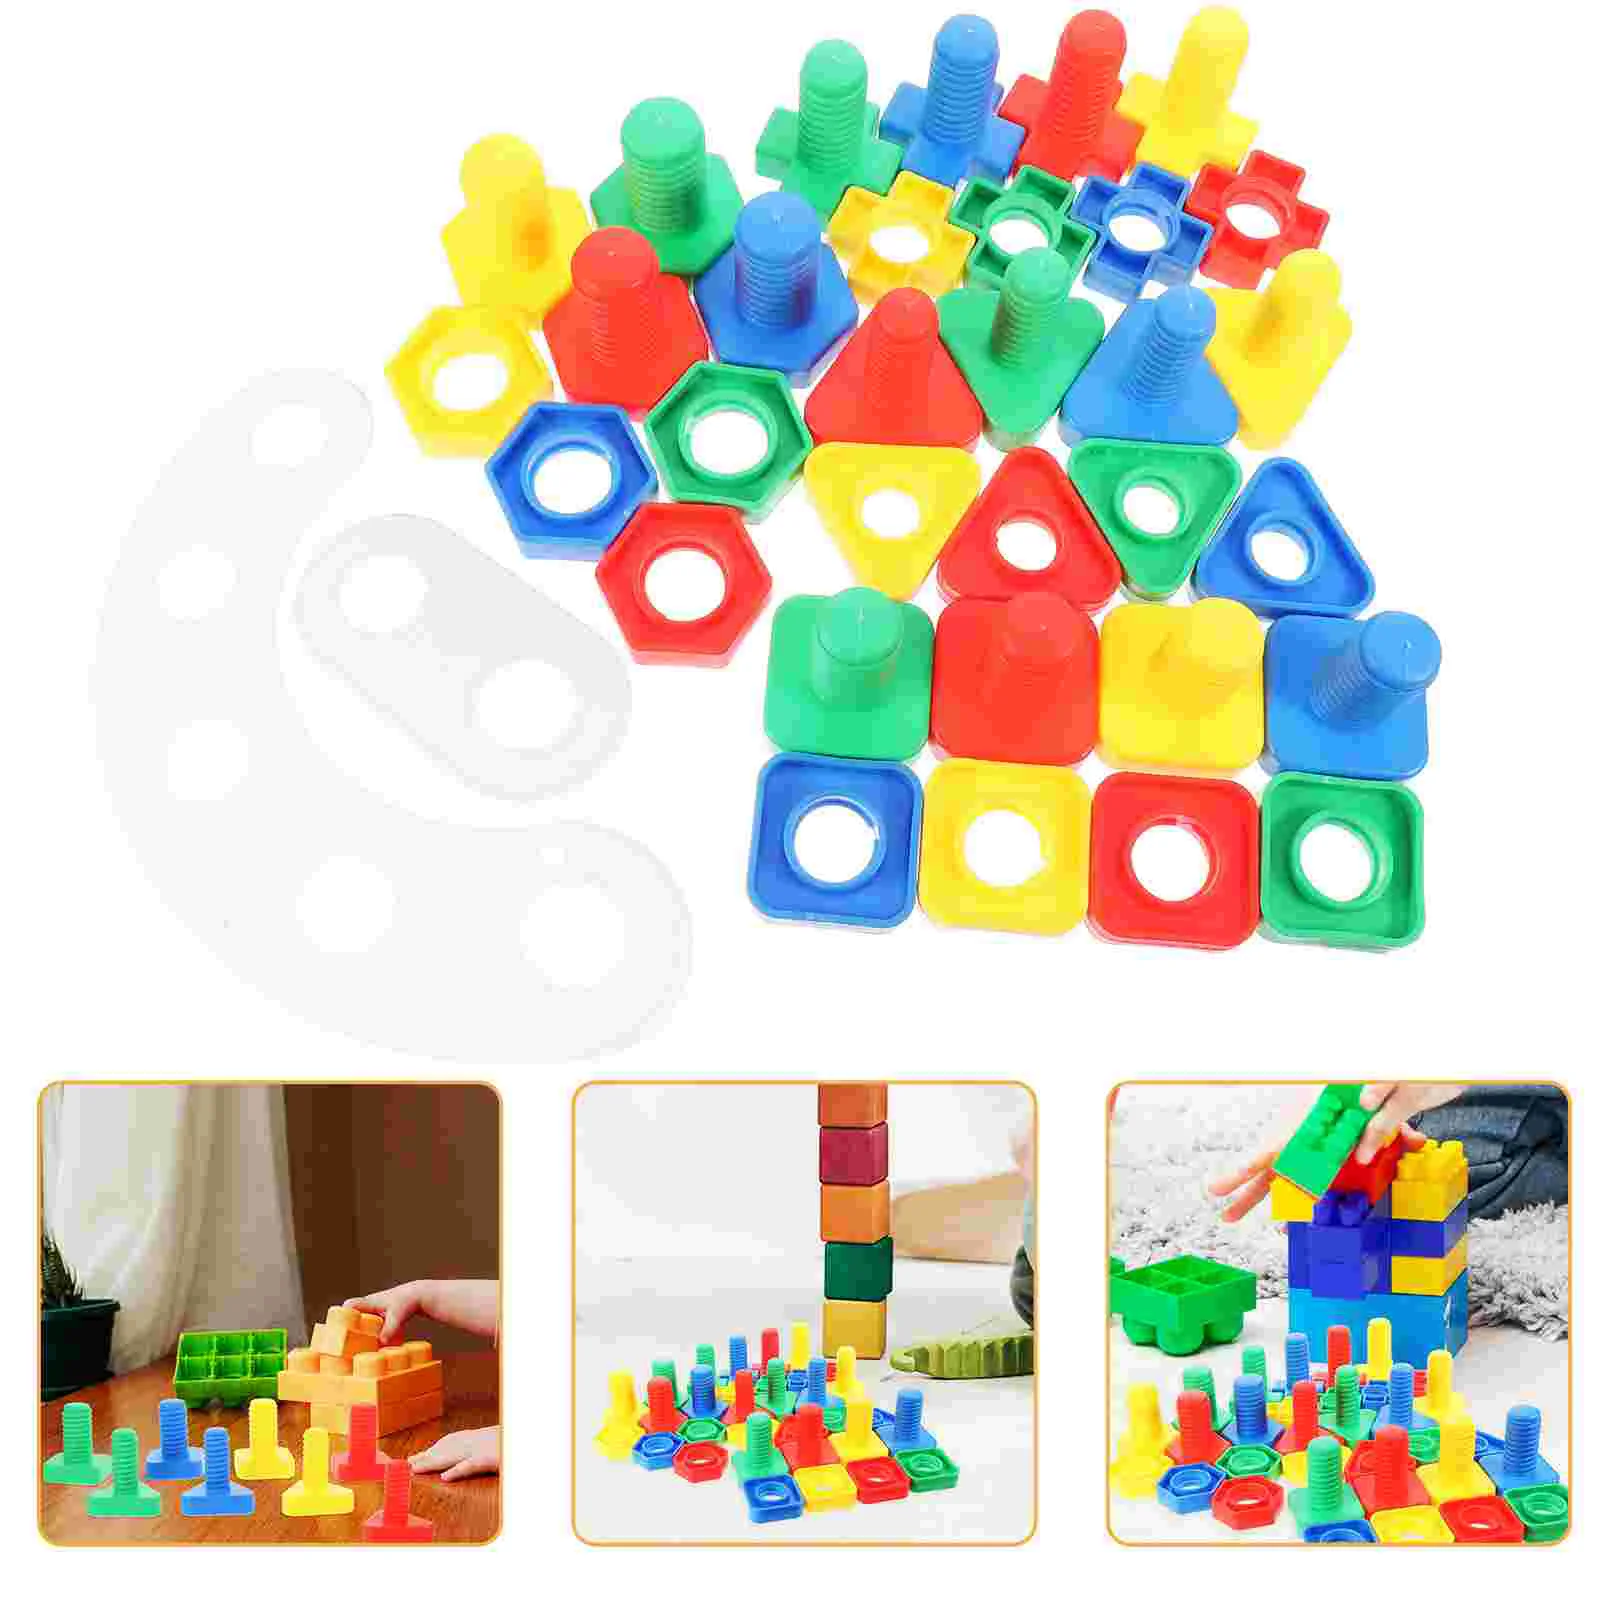 

16 Pairs Toy Screw Nut Early Learning Tighten The Screws Intelligence Tightening Color Matching Kids Educational Toys Baby